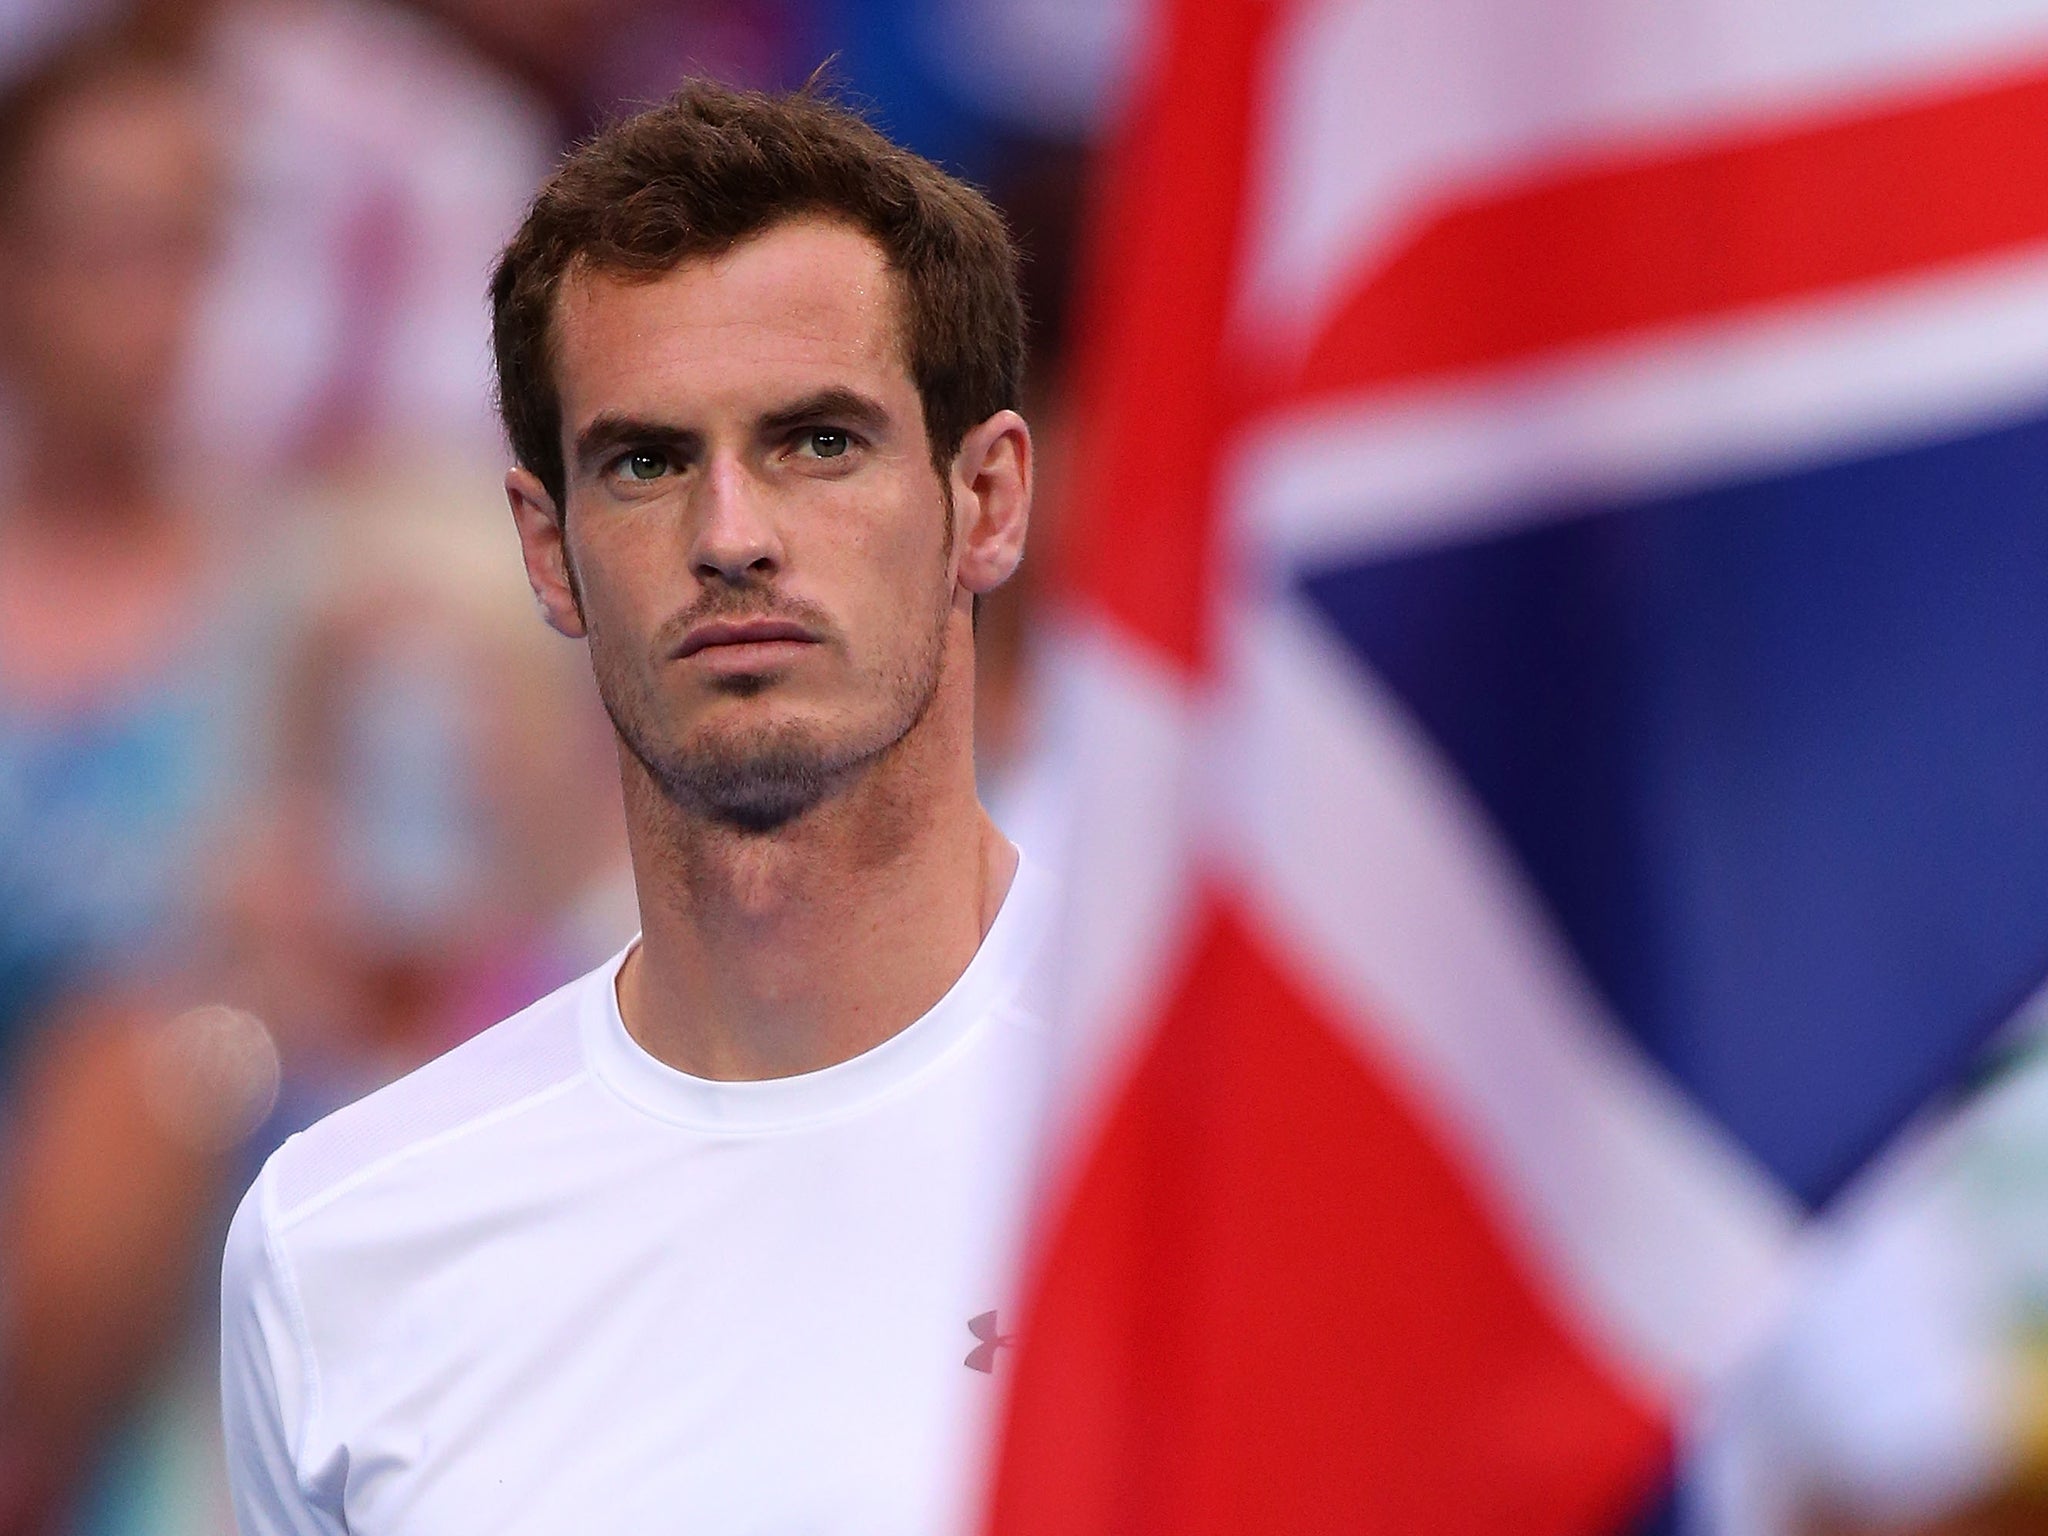 Andy Murray of Great Britain looks on as the national anthems are played prior to his singles match against Benoit Paire of France during day two of the 2015 Hopman Cup